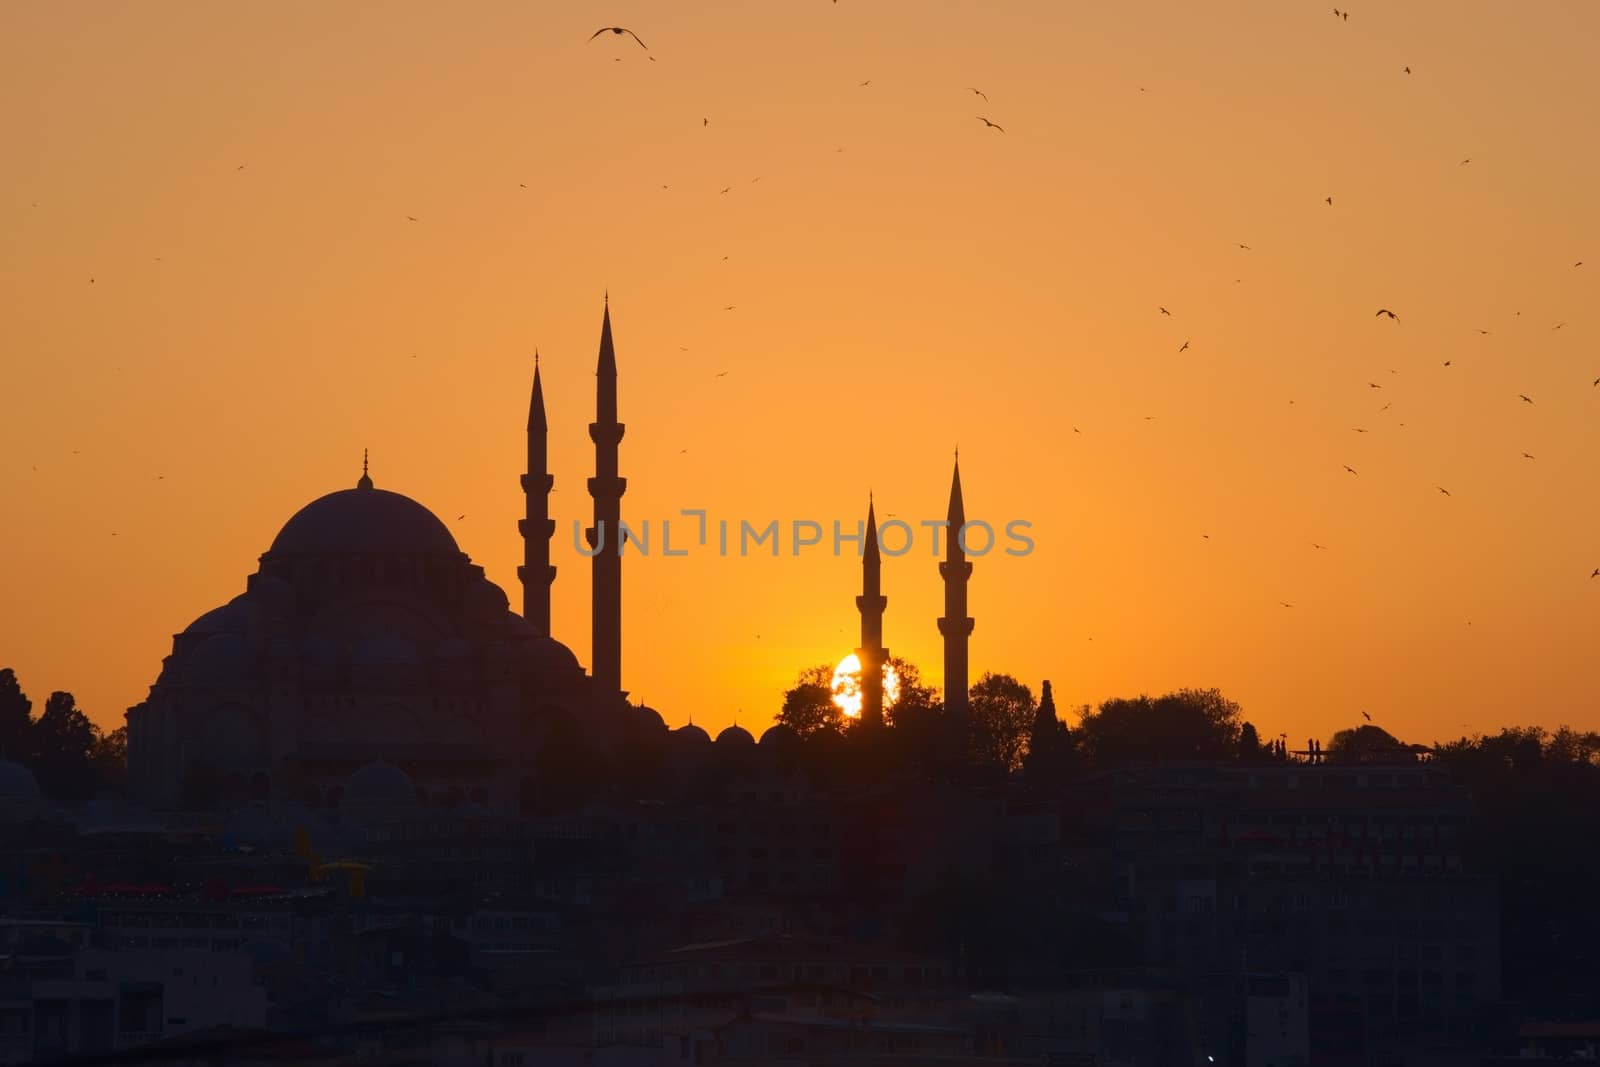 Hagia Sophia, the most important tourist attraction of Istanbul, Turkey, silhouetted against the ochre sunset sky.